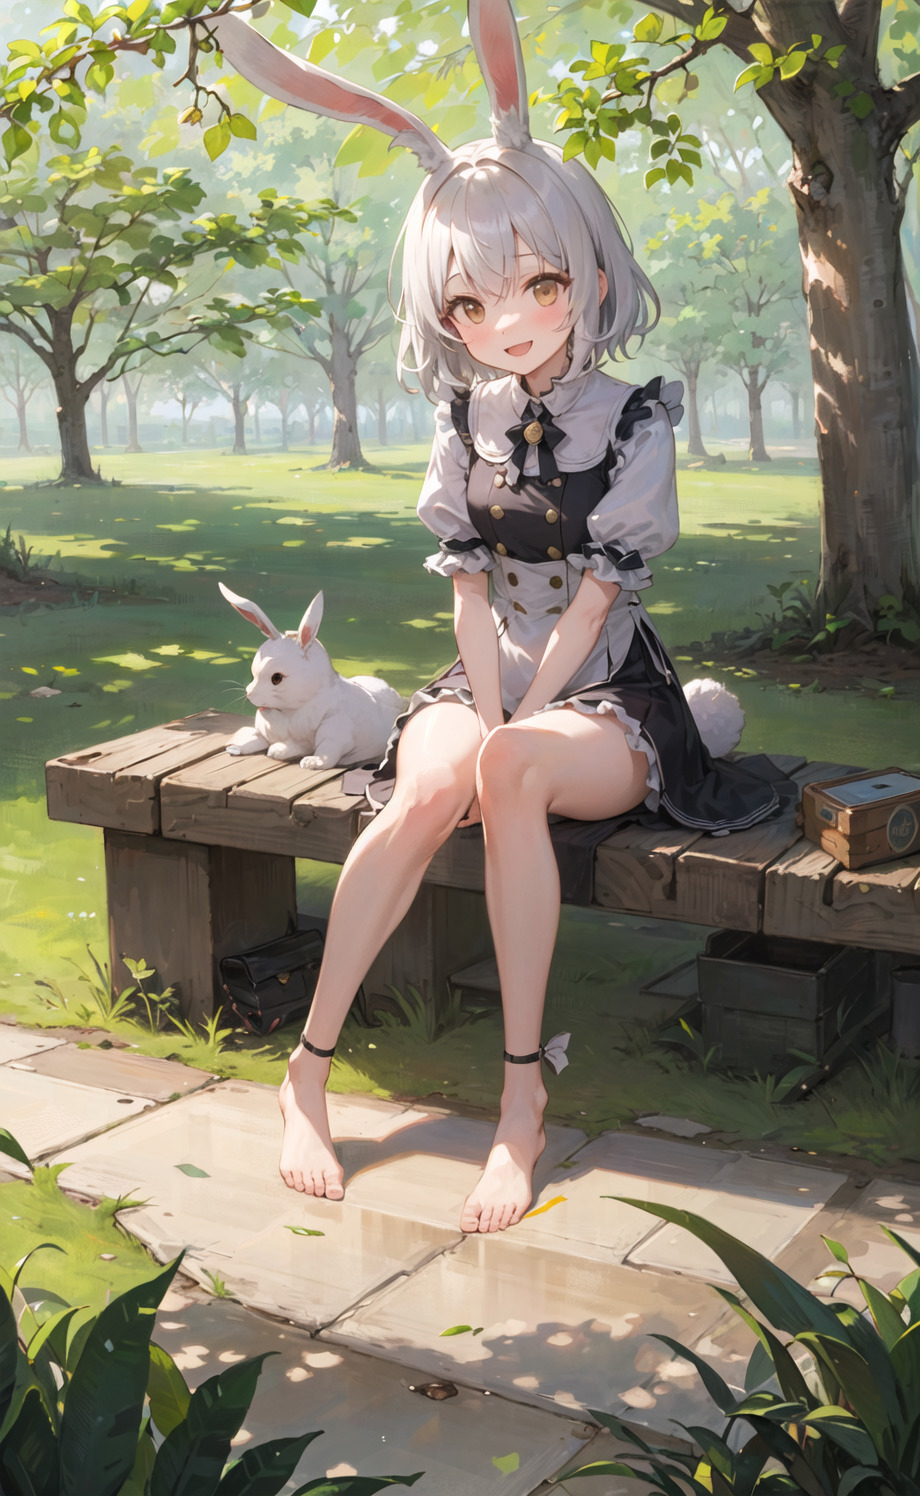 A cartoon drawing of a woman sitting on a bench with a rabbit.